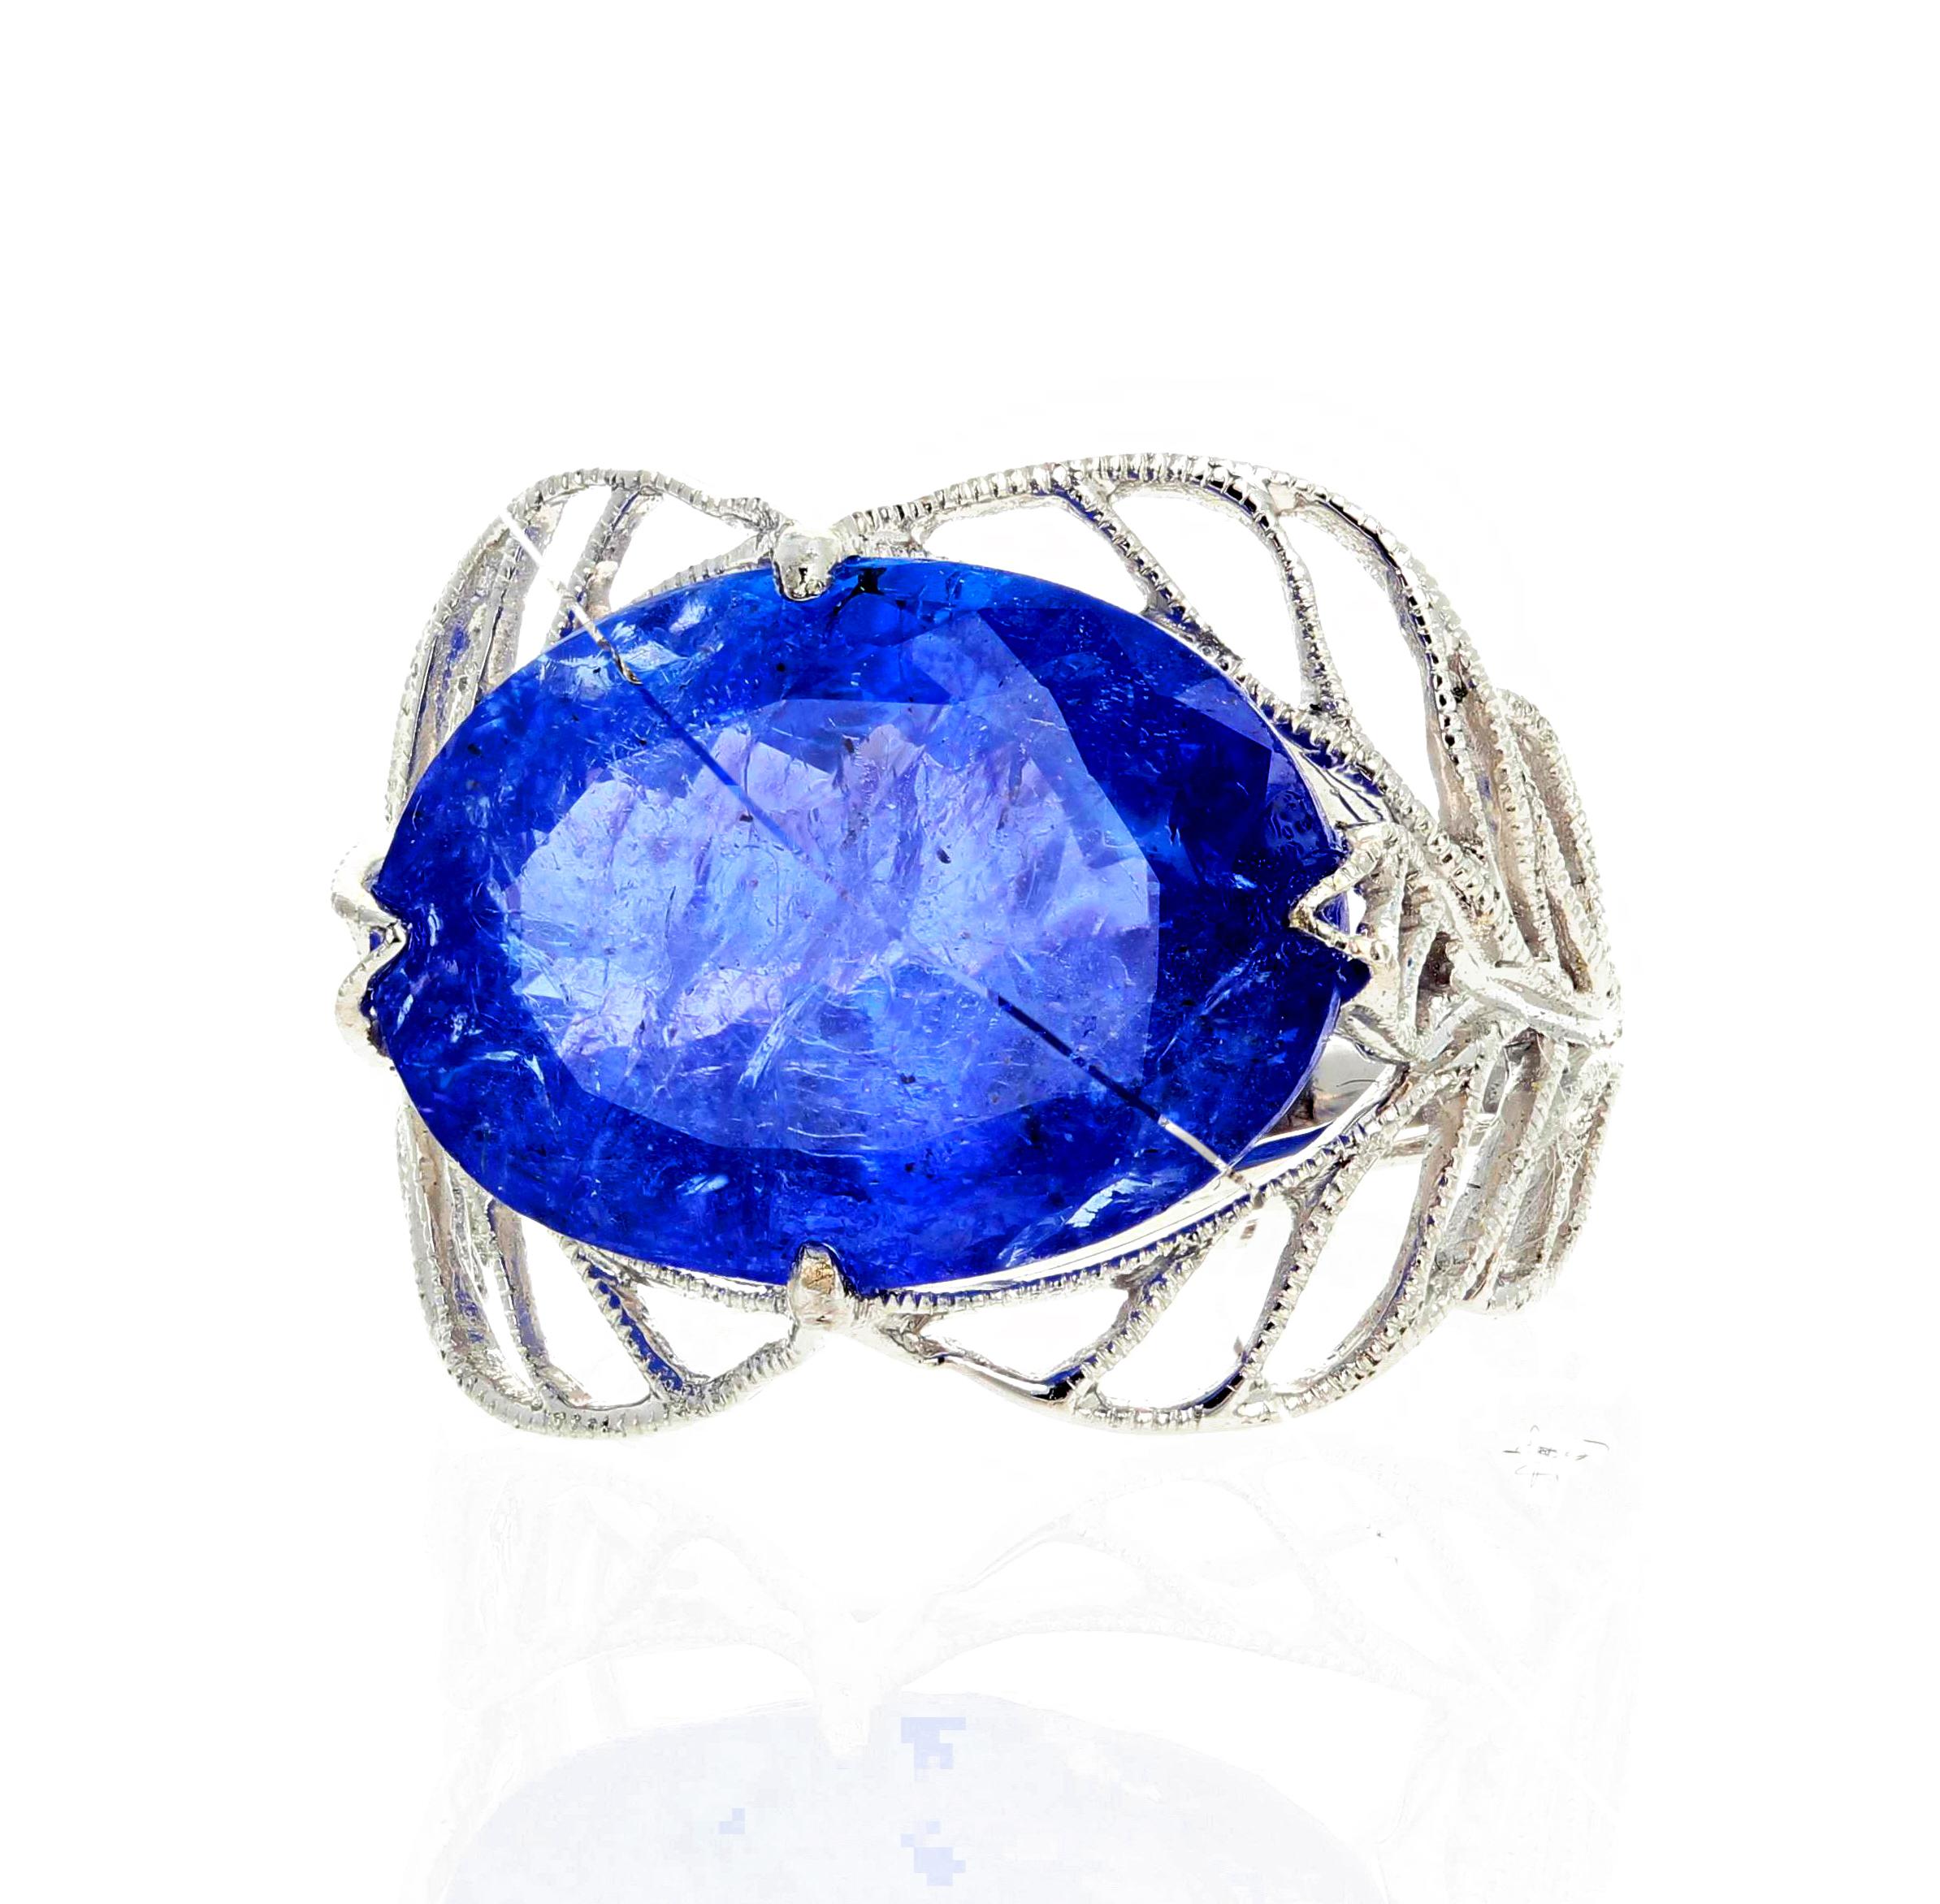 Big natural blue 12.35 Carat oval cut Tanzanite set in an elegant white gold ring size 7 (sizable).  This natural Tanzanite is approximately 17 mm x 13 mm.  There are no eye visible inclusions in this beautiful gemstone. 